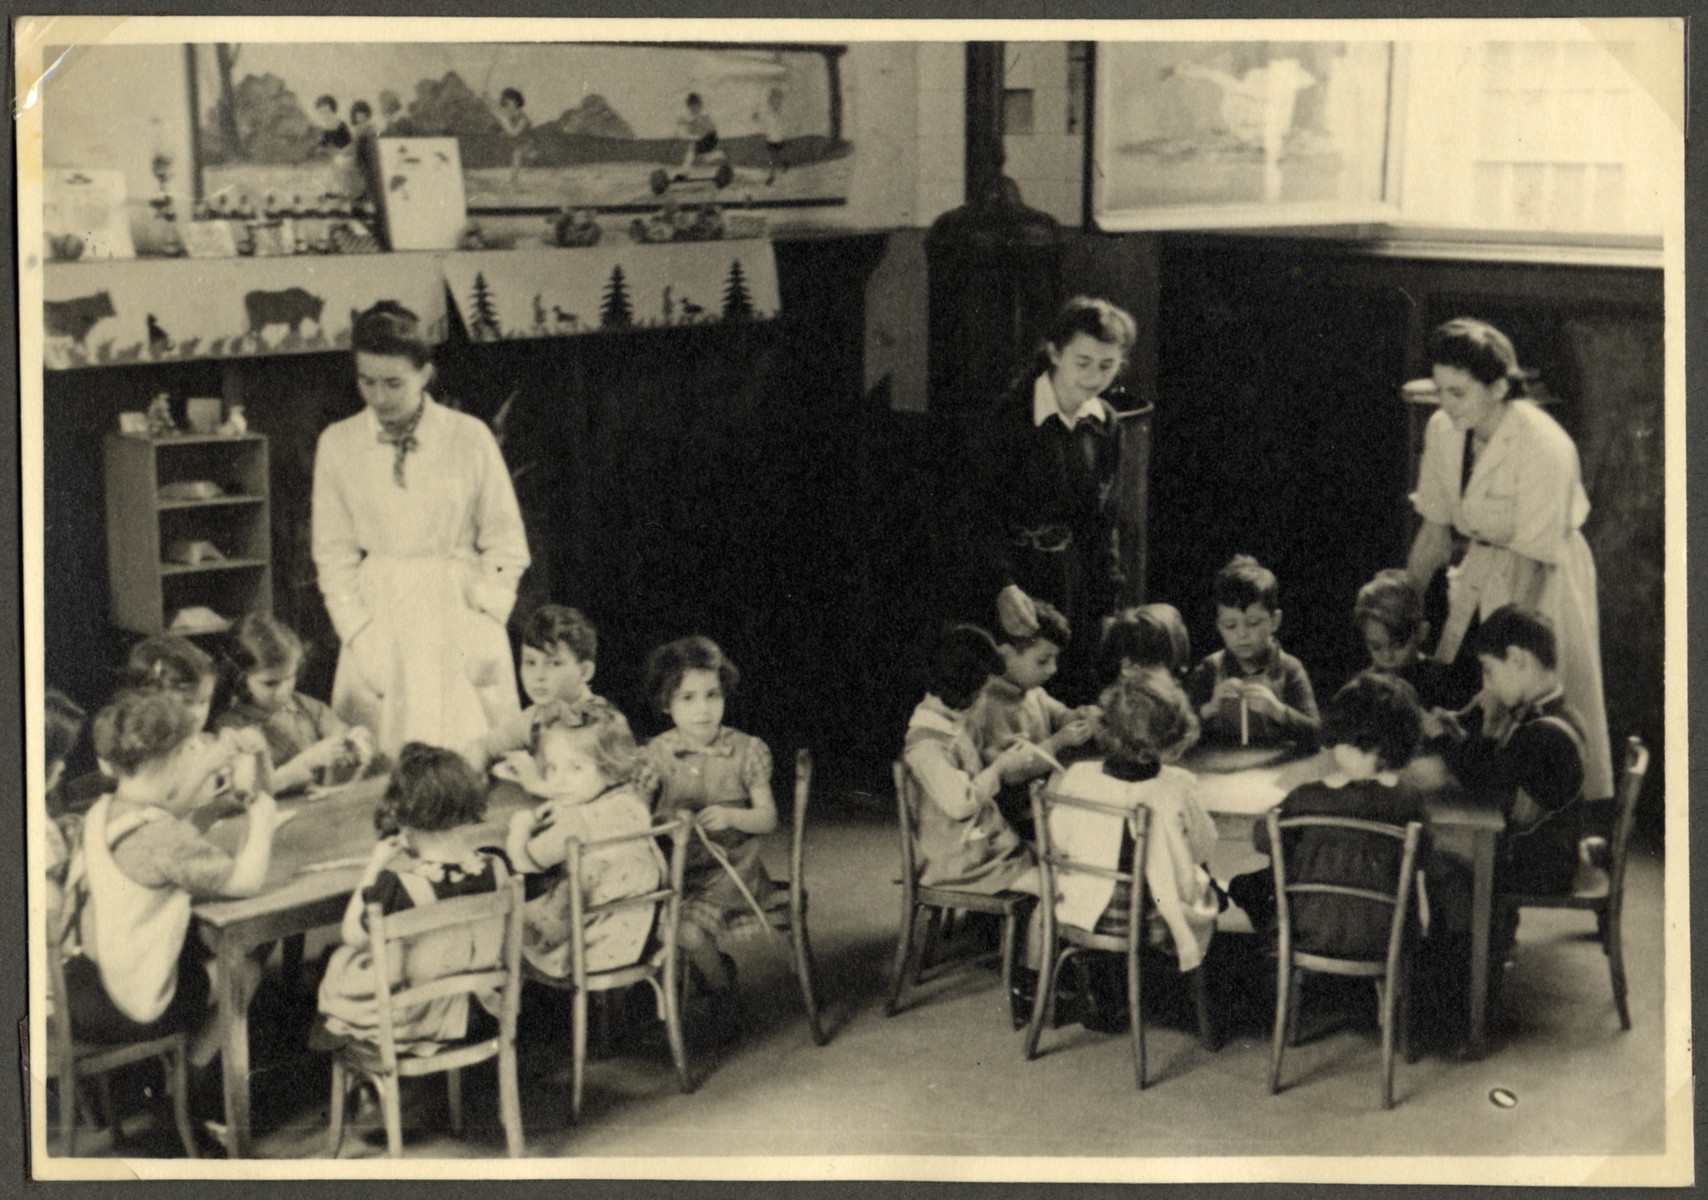 Children sit at tables to do an art project in a classroom in the Nos Petits Jewish kindergarten.

The teacher in the center is wearing a Star of David.